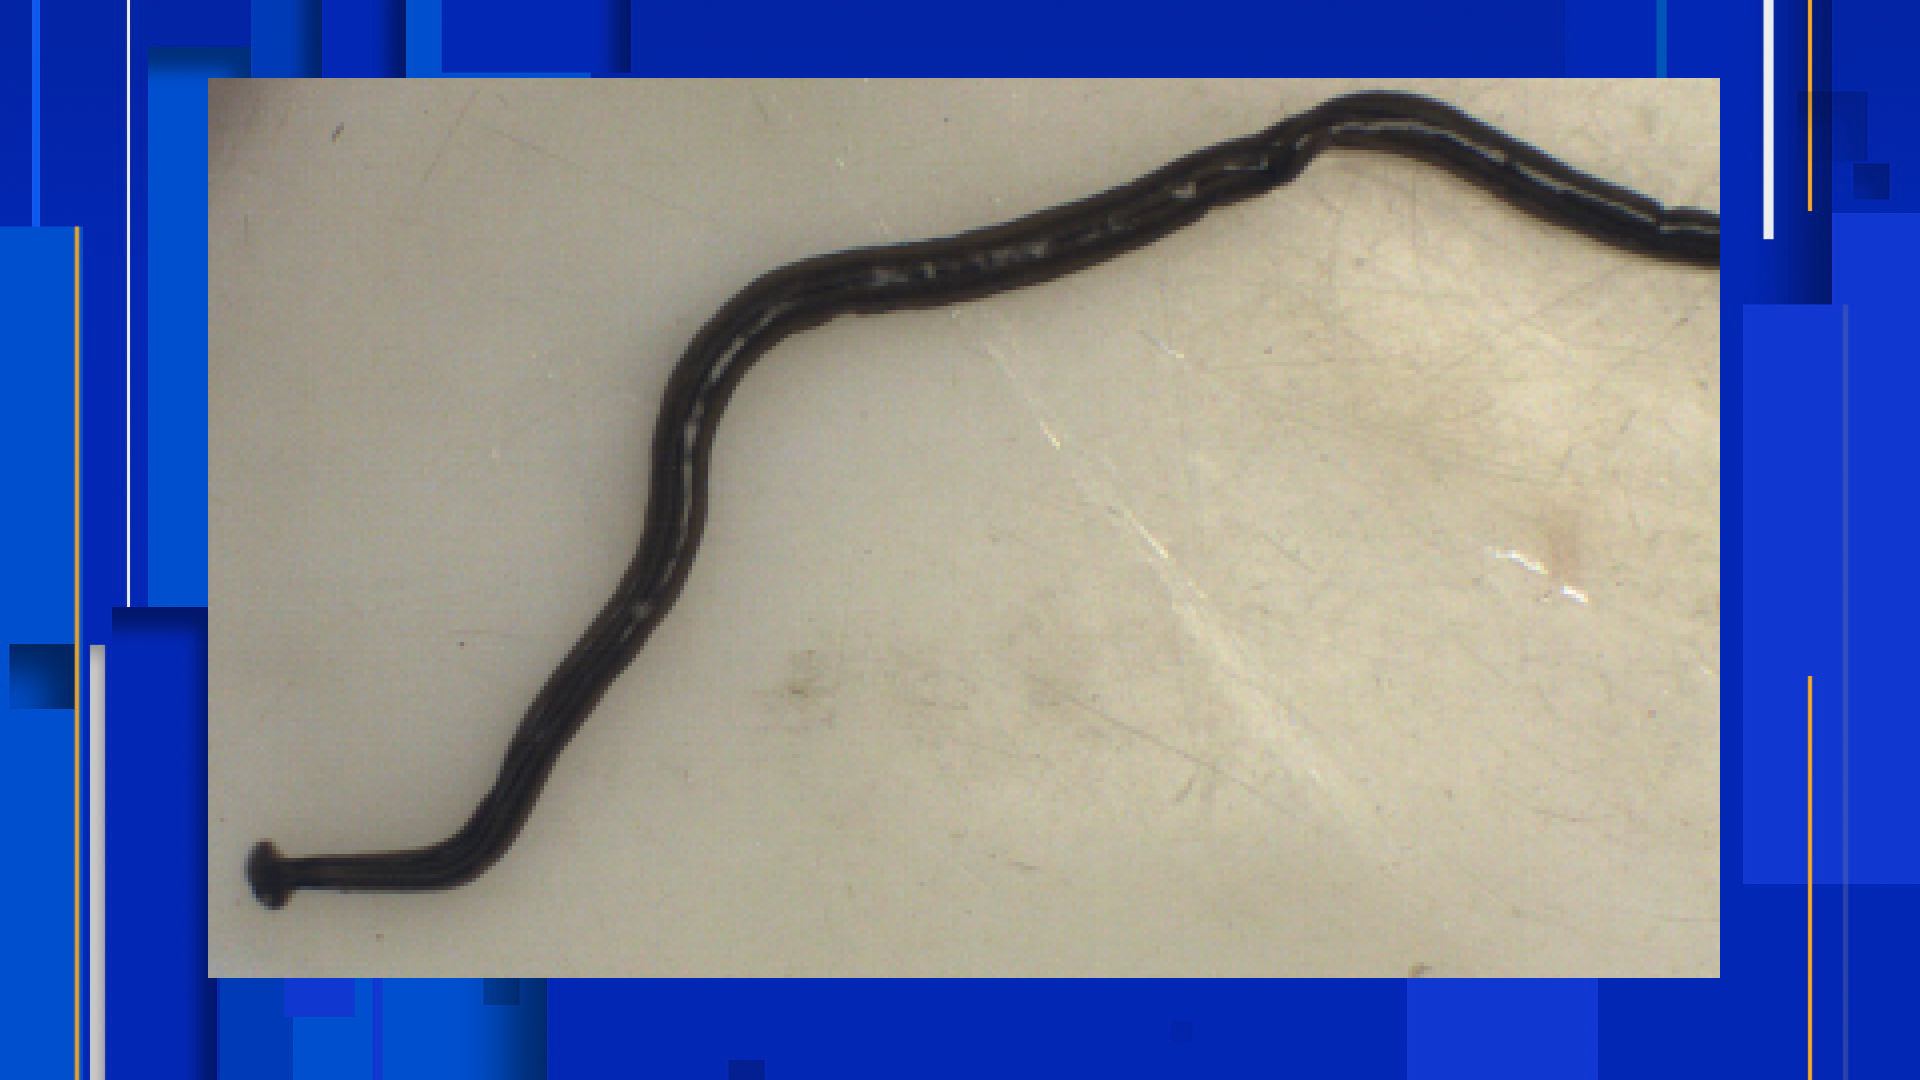 Invasive worm spotted in San Antonio area could carry rat lungworm parasite